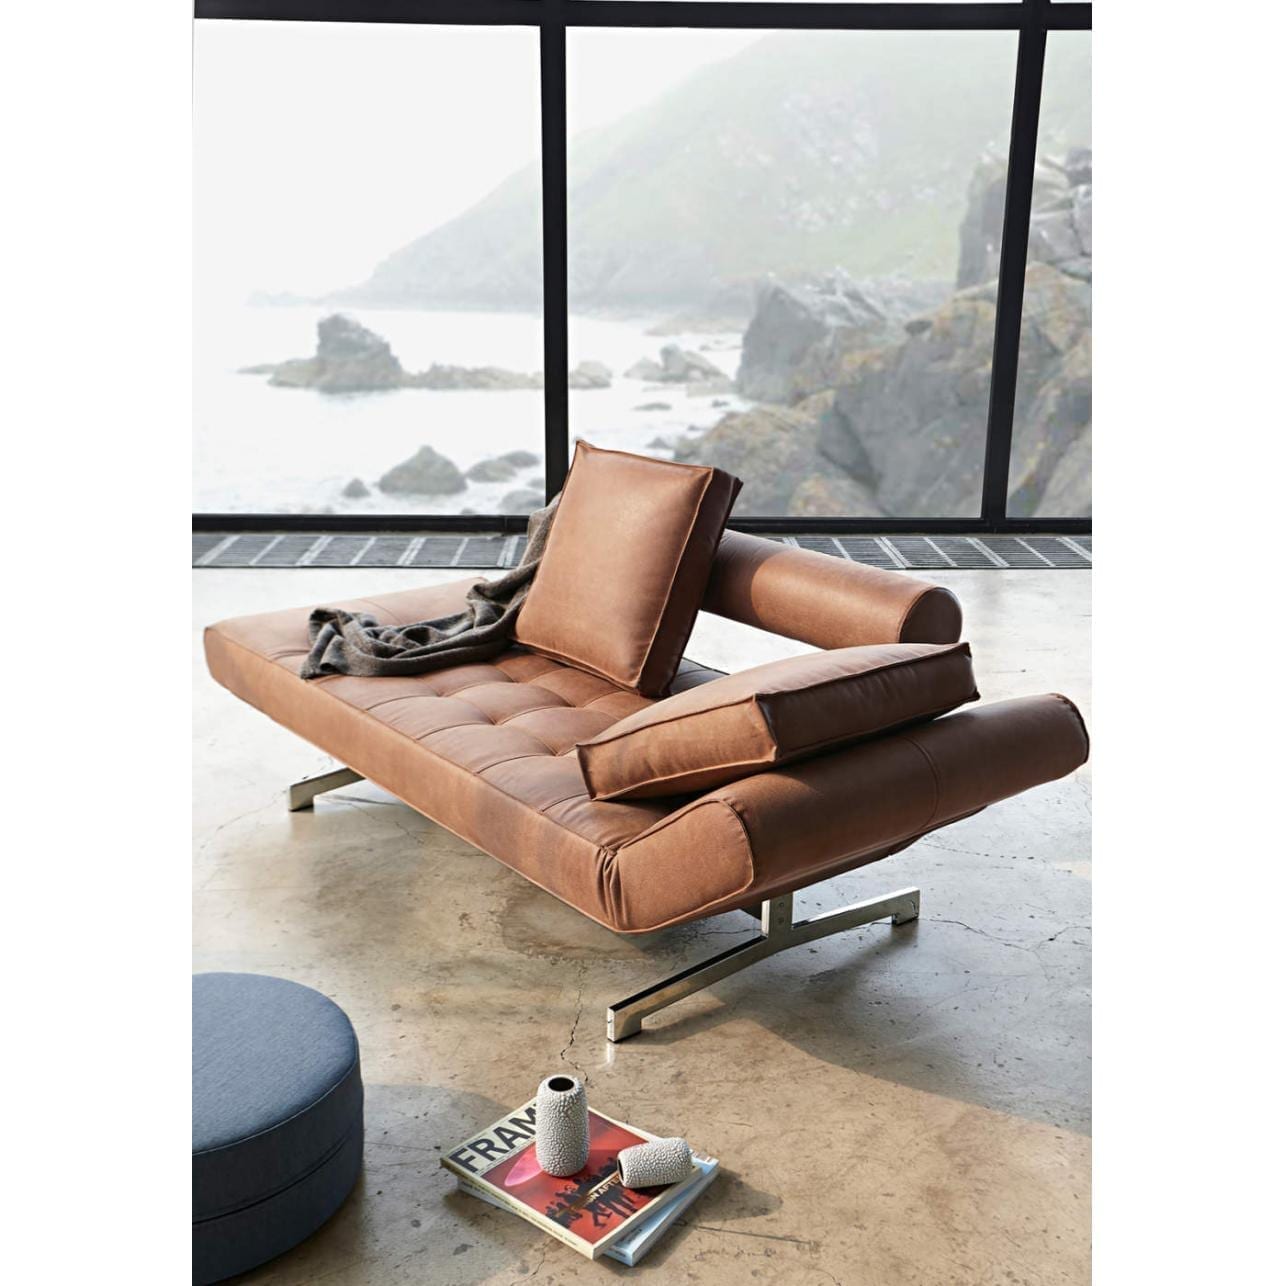 innoation-ghia-chrome-sofabed-kanapeagy-daybed-innoconcept-design (6)